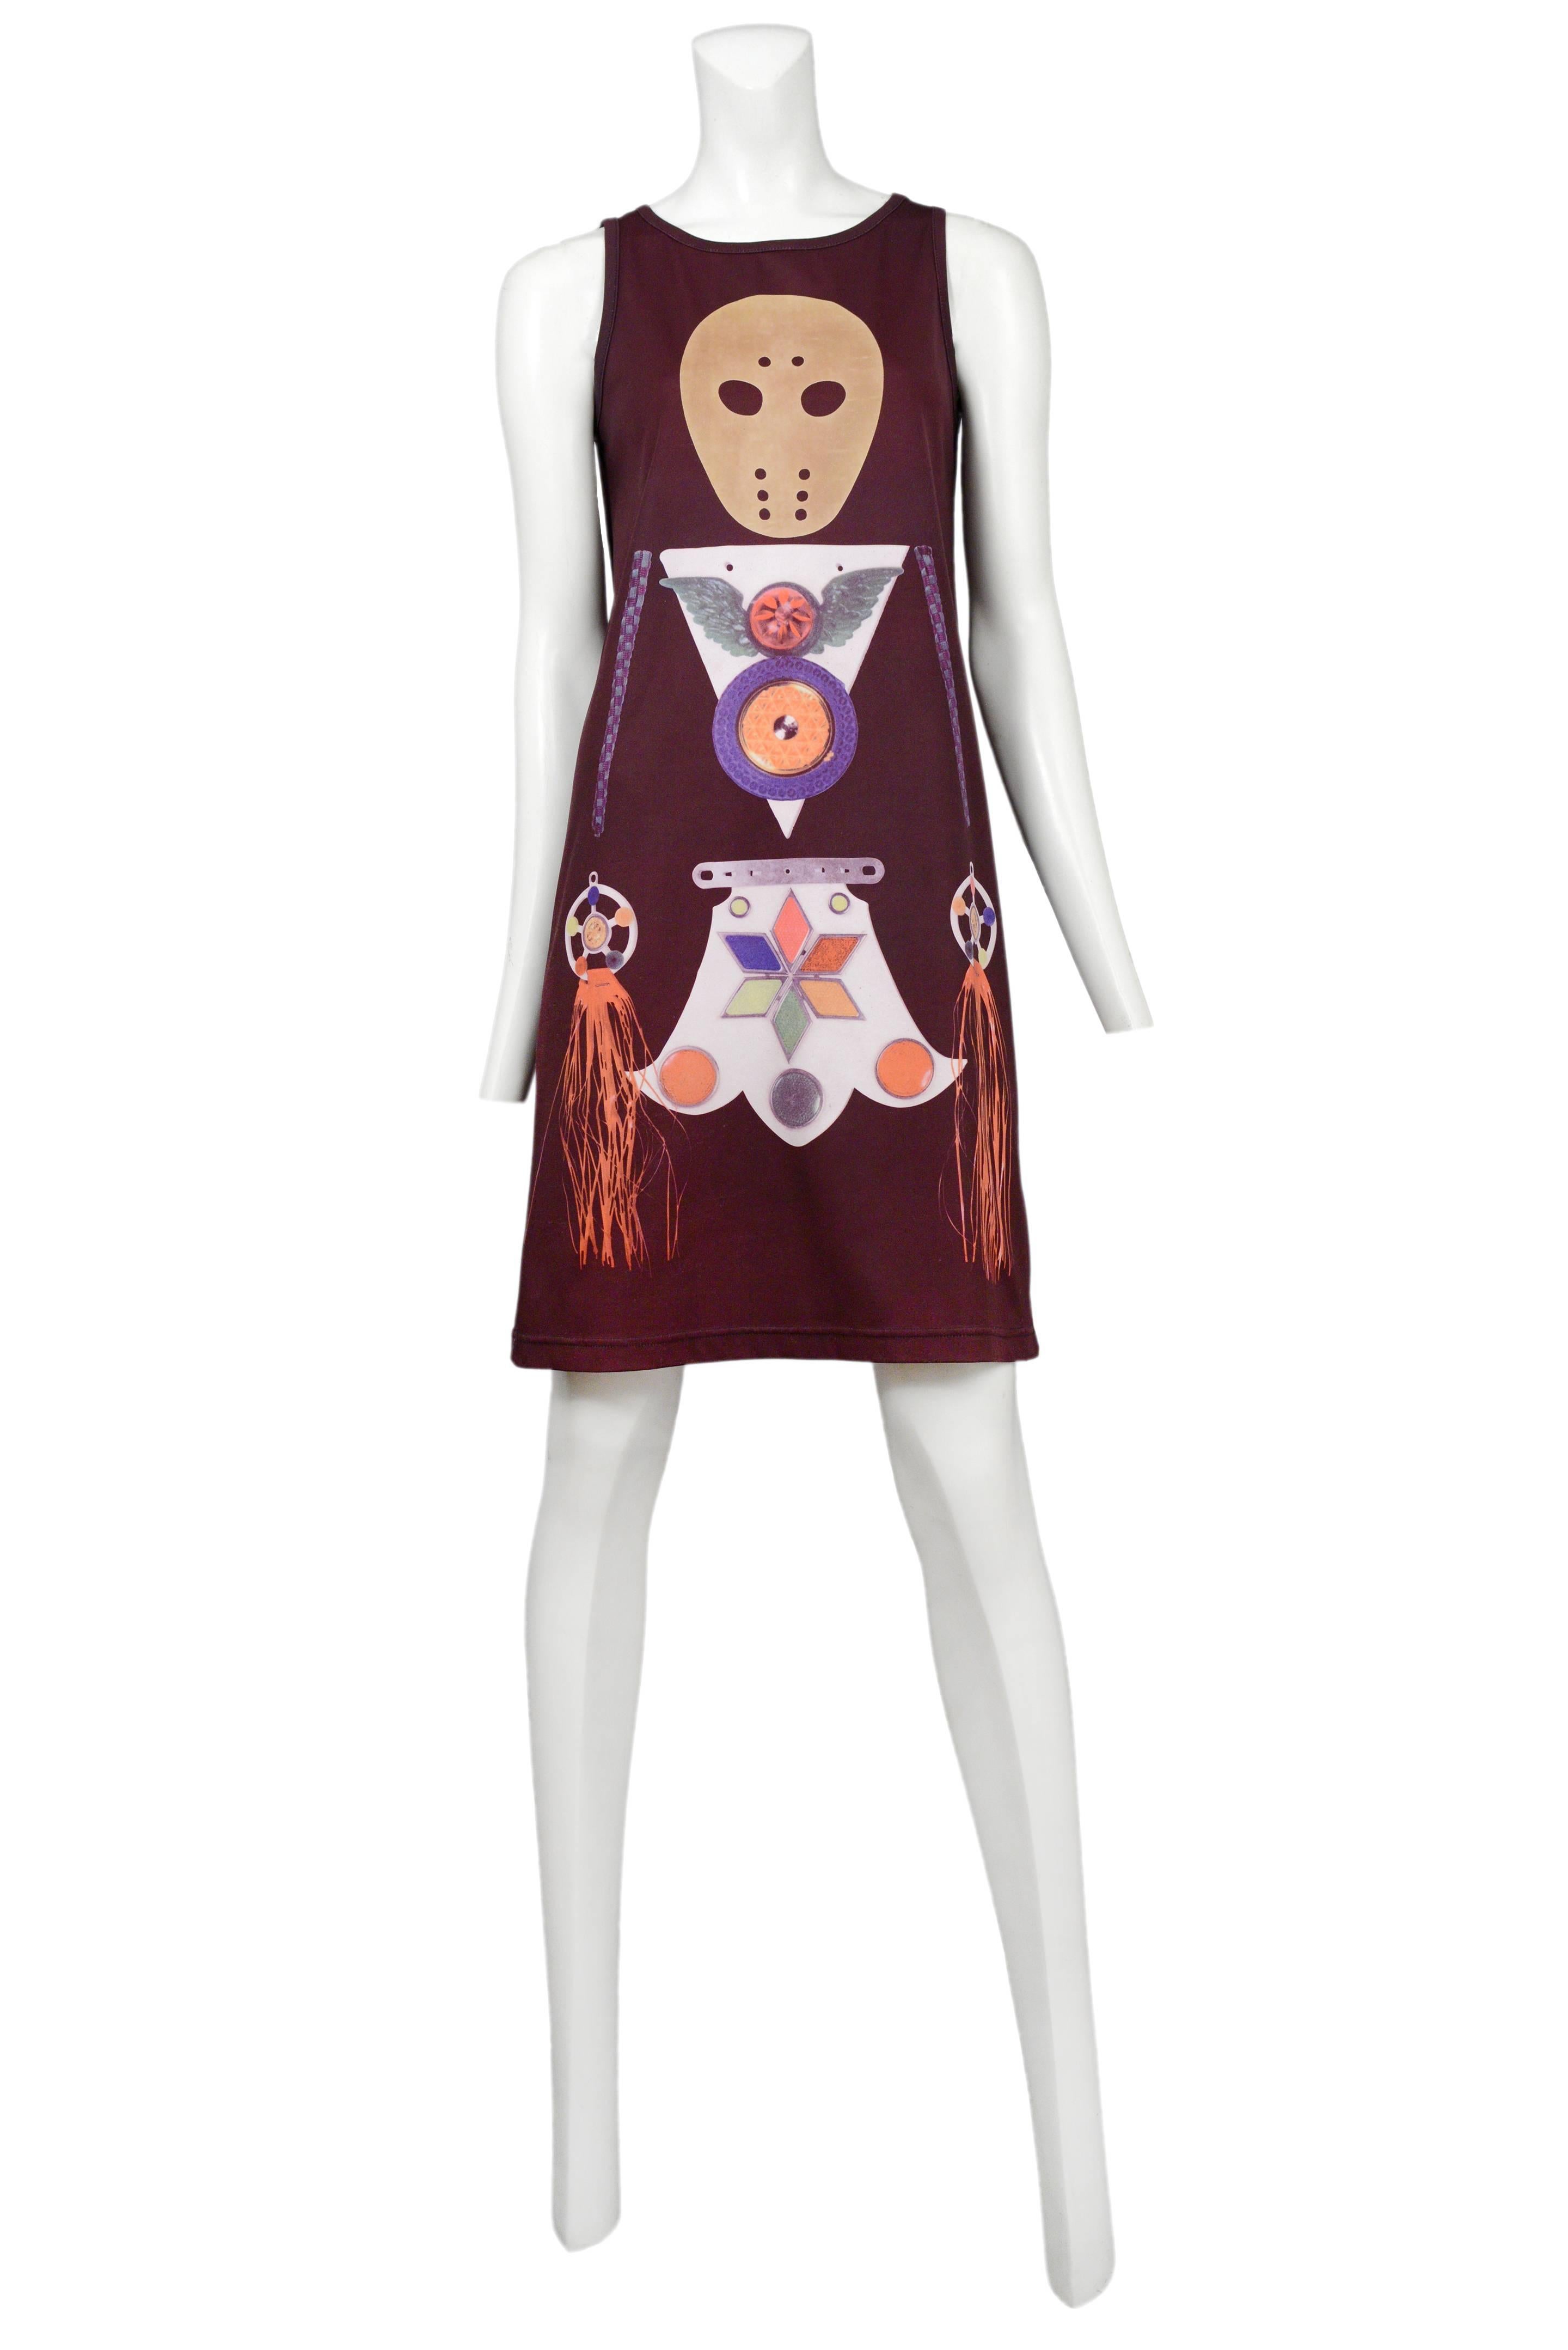 Vintage brown tank dress featuring at tribal mask motif printed on the front. Circa 1998 /1999.
Please inquire for additional images.